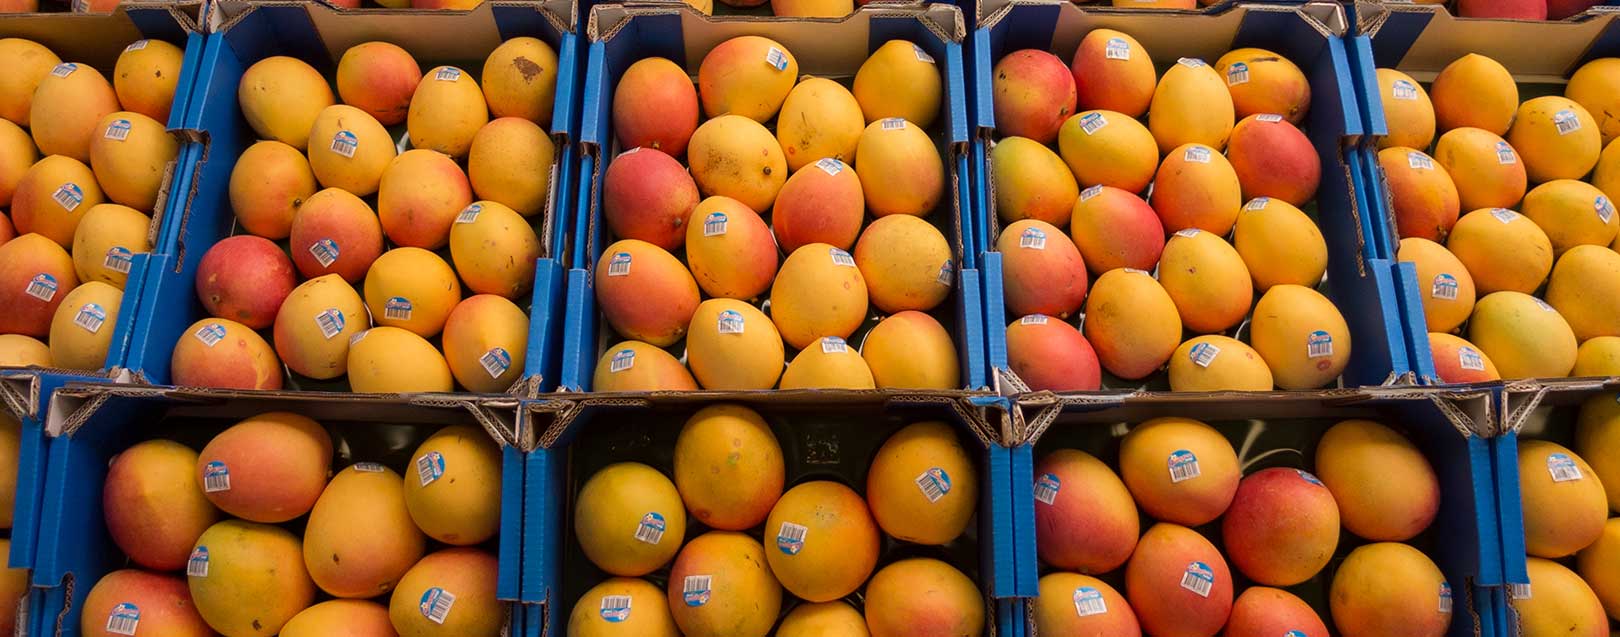 India may export mangoes to Australia after meeting their biosecurity standards